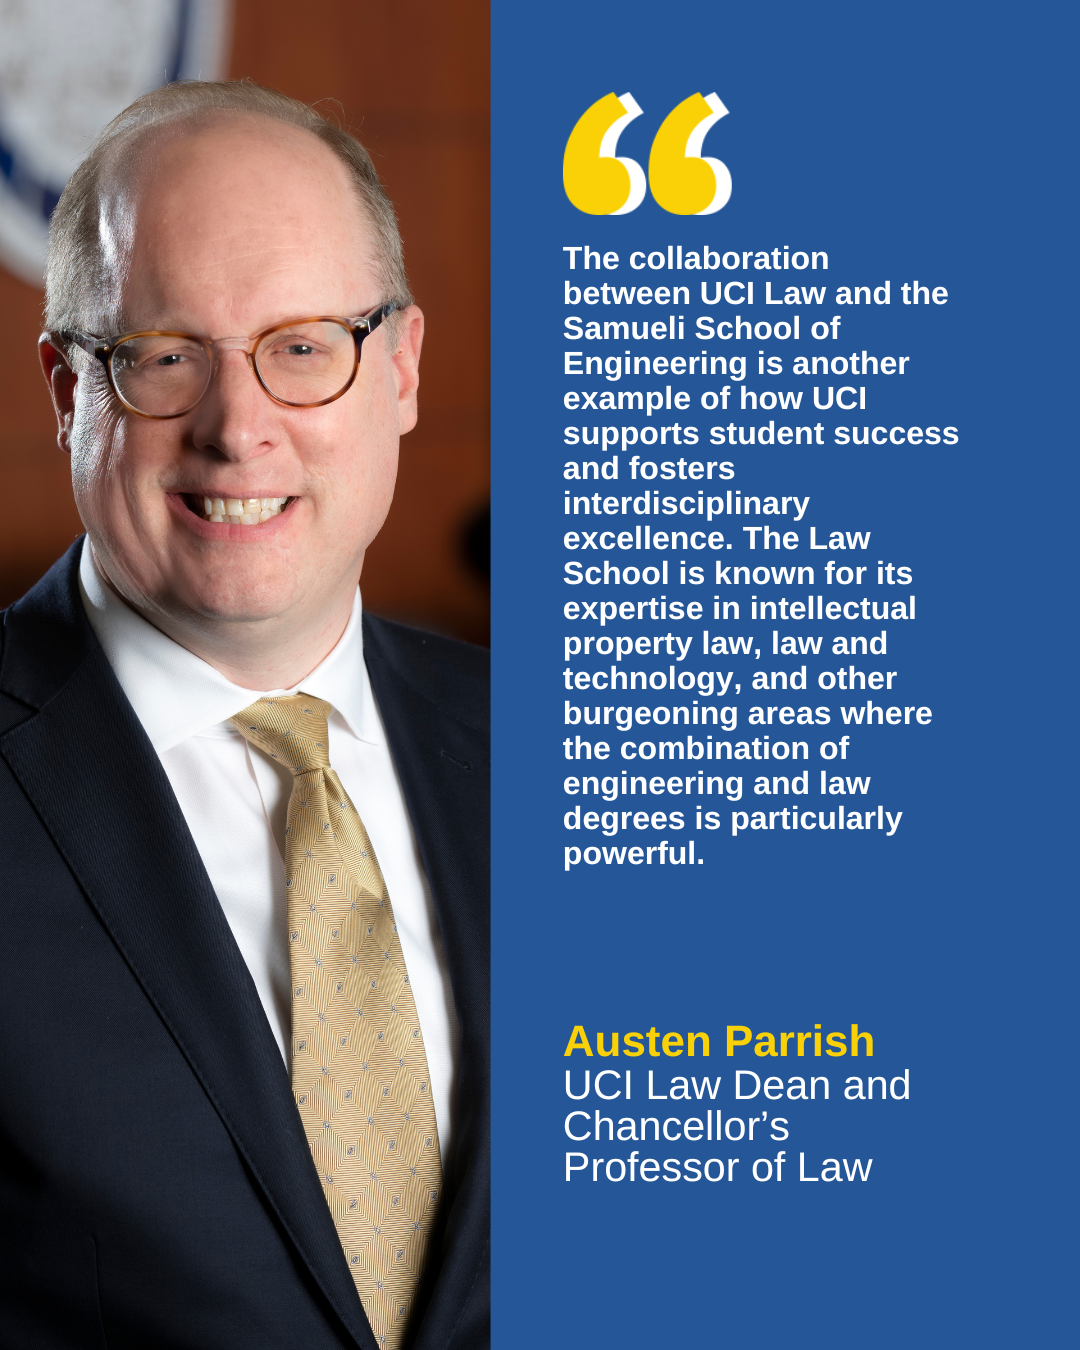 The collaboration between UCI Law and the Samueli School of Engineering is another example of how UCI supports student success and fosters interdisciplinary excellence. The Law School is known for its expertise in intellectual property law, law and technology, and other burgeoning areas where the combination of engineering and law degrees is particularly powerful.  - Austen Parrish, UCI Law Dean and   Chancellor's Professor of Law